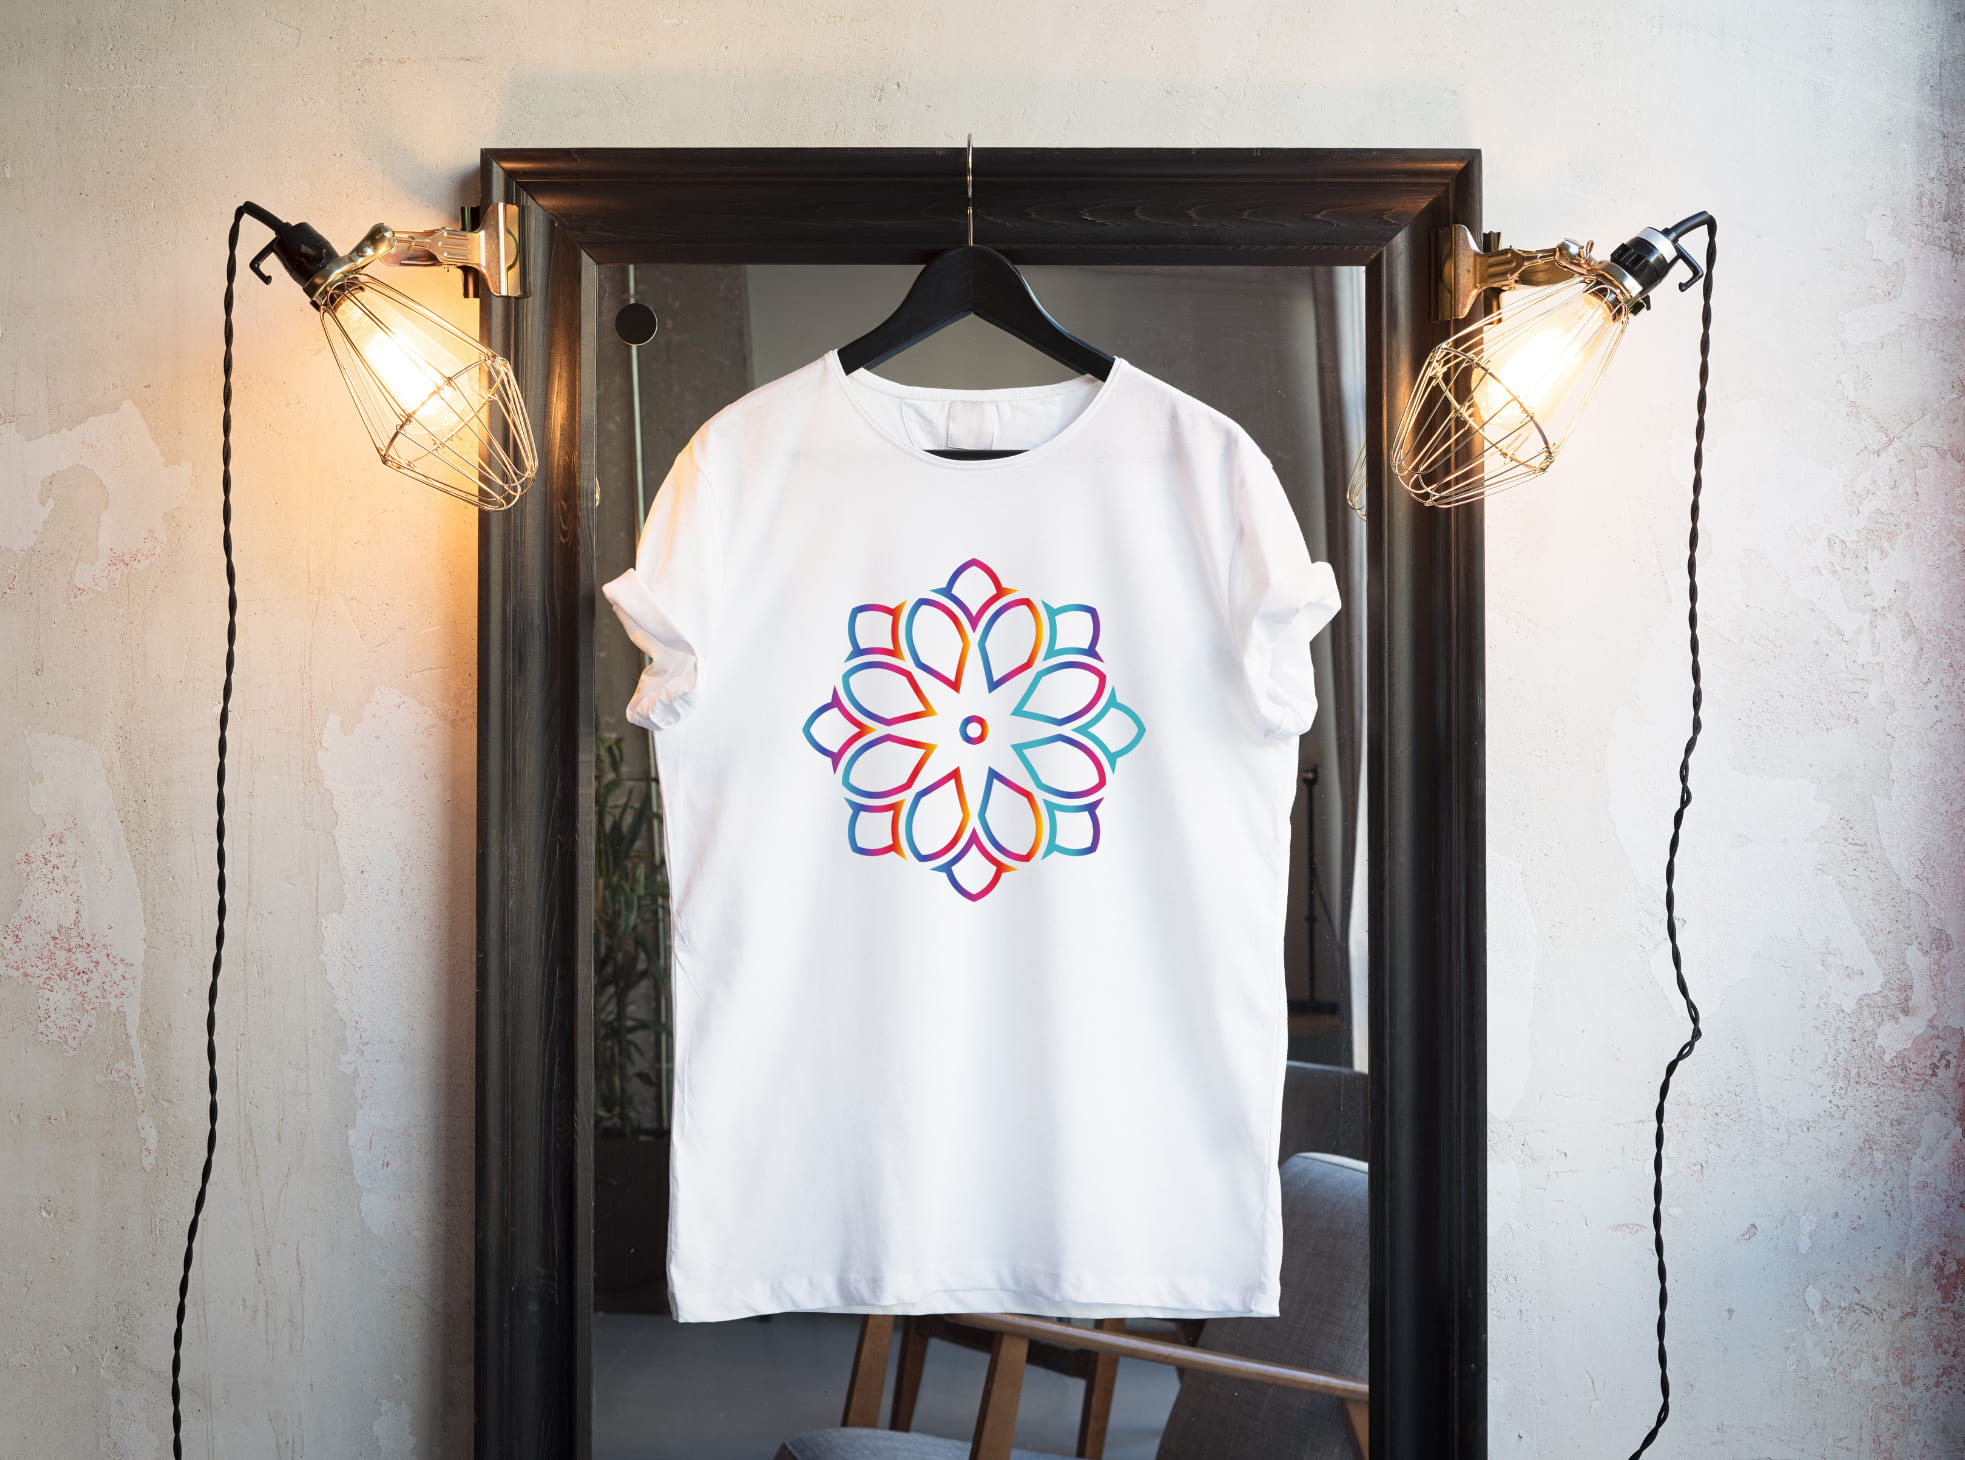 Classic white t-shirt with the colorful gradient lotus.